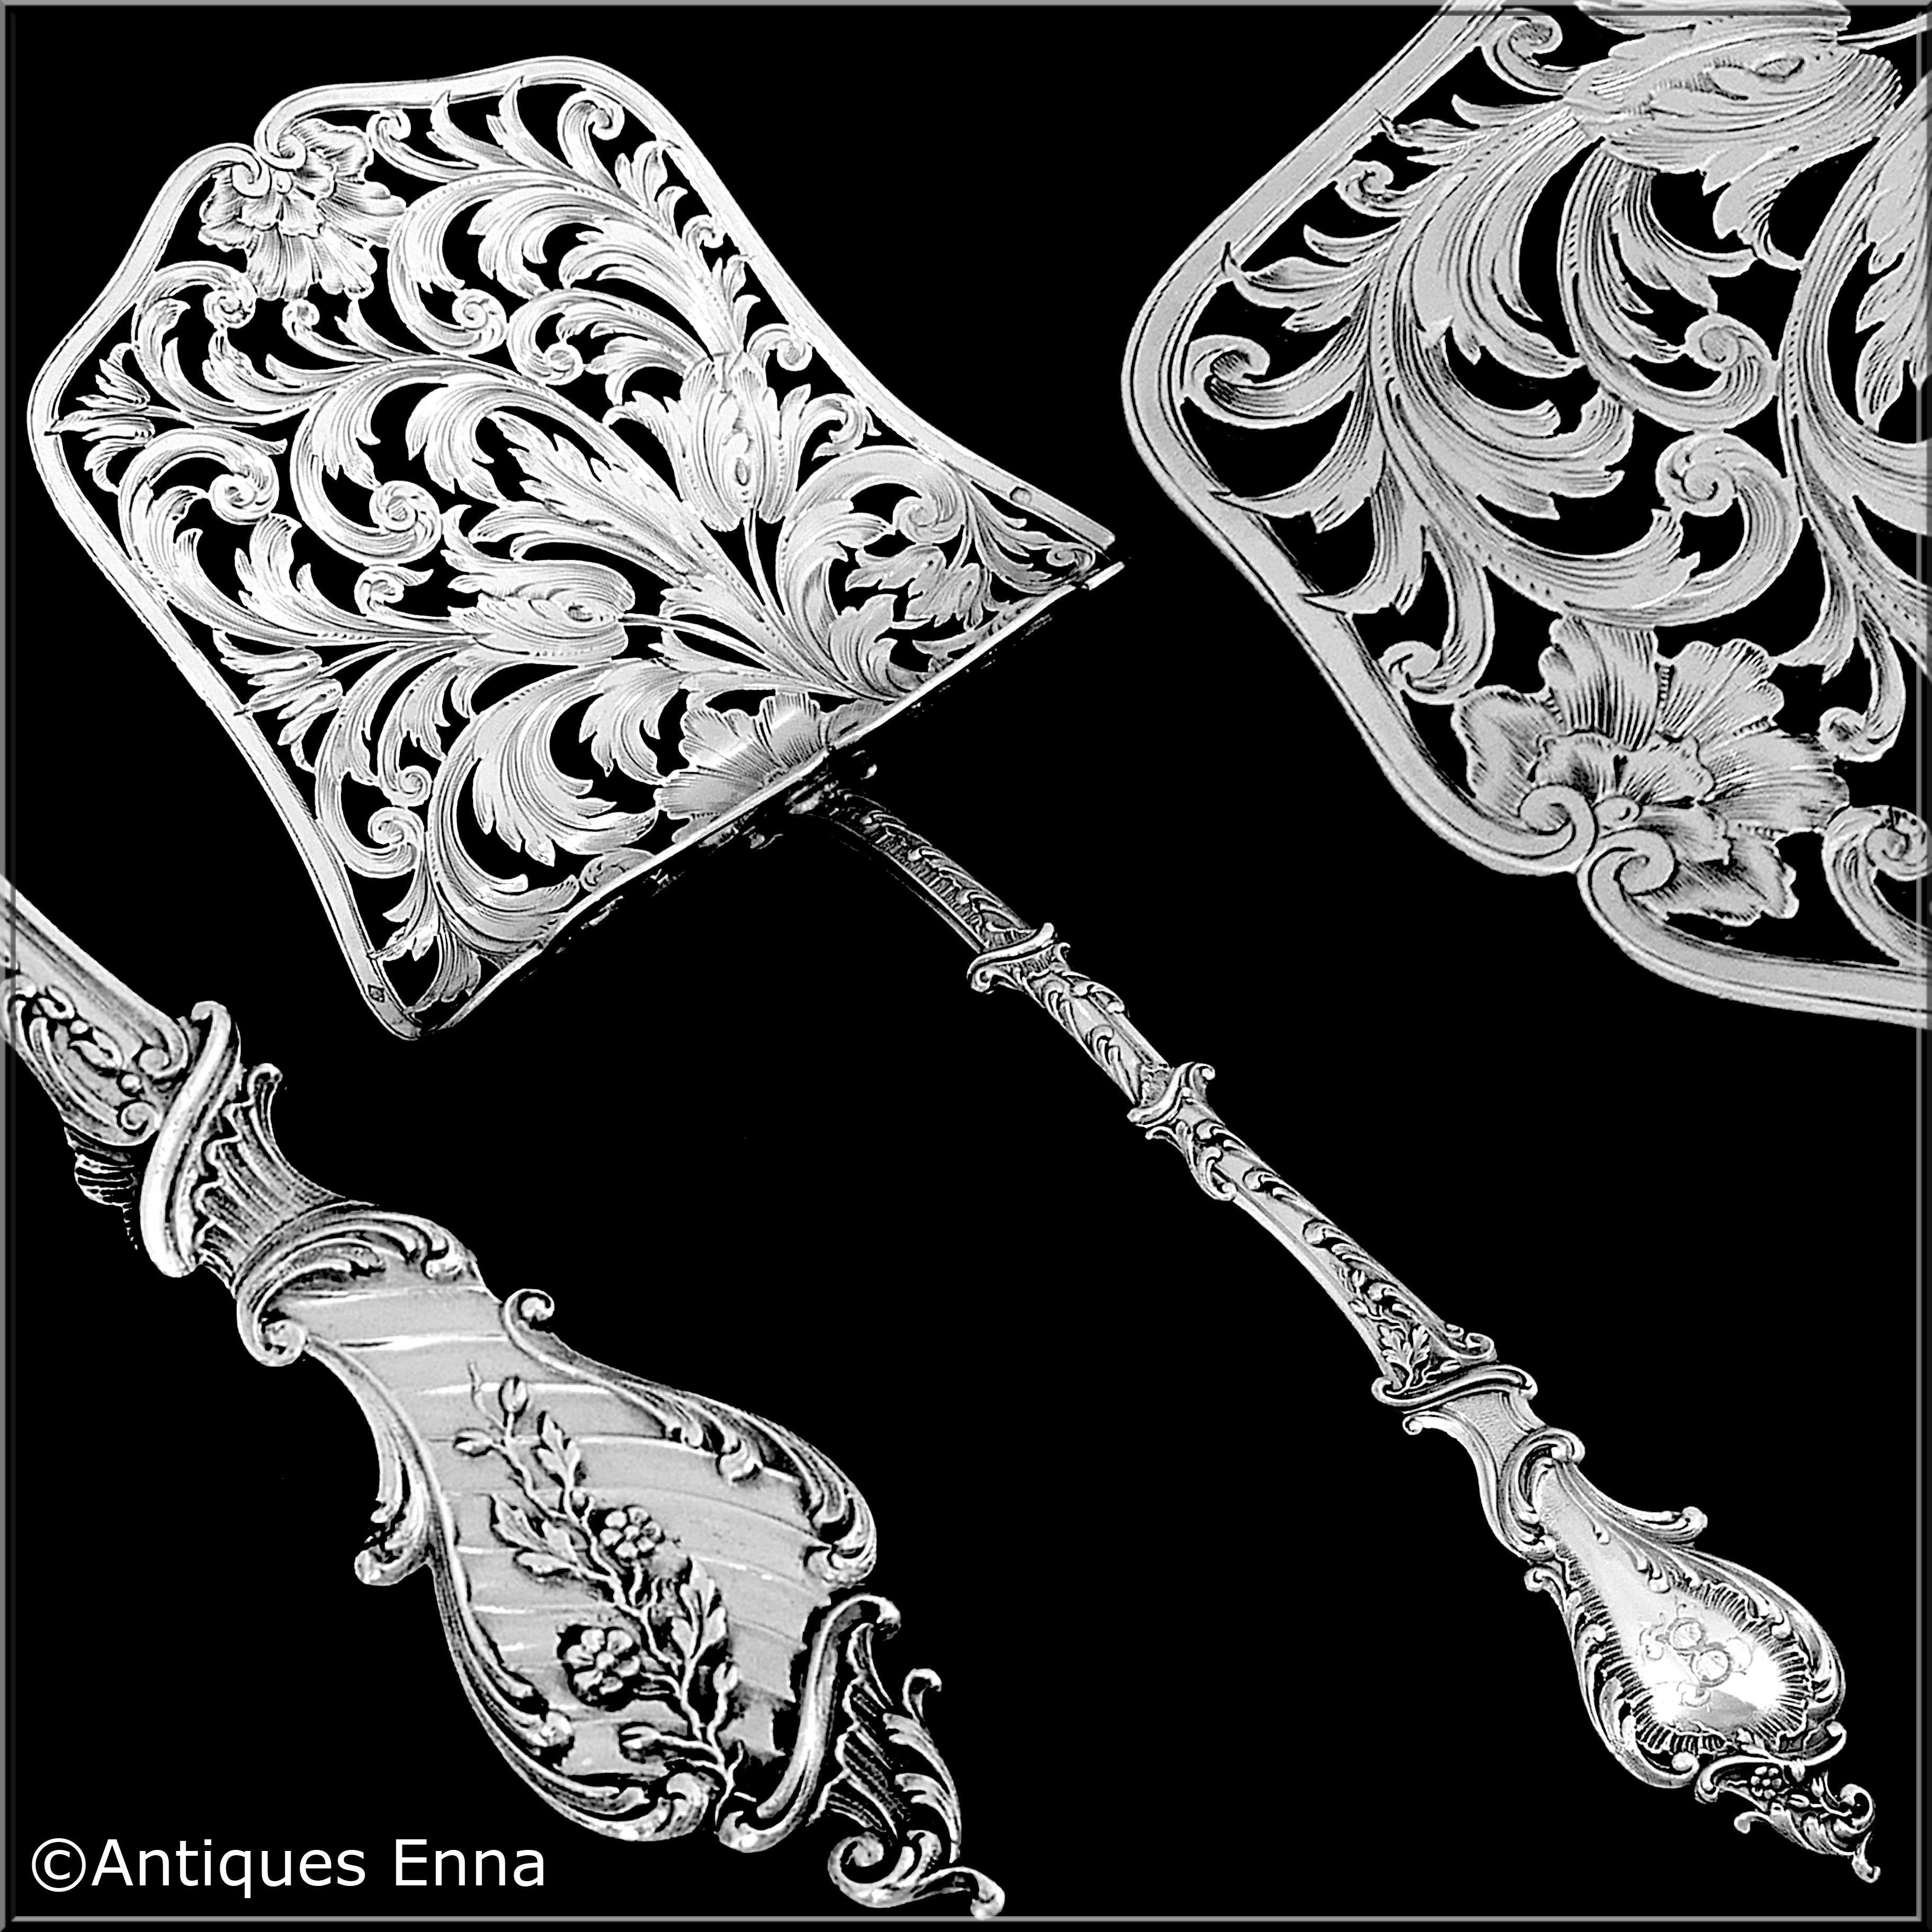 Head of Minerve 1st titre for 950/1000 French sterling silver guarantee.

Exceptional asparagus/pastry server in all sterling silver. The sophistication of this design and the quality of workmanship is typical of that of the Maison Soufflot. The